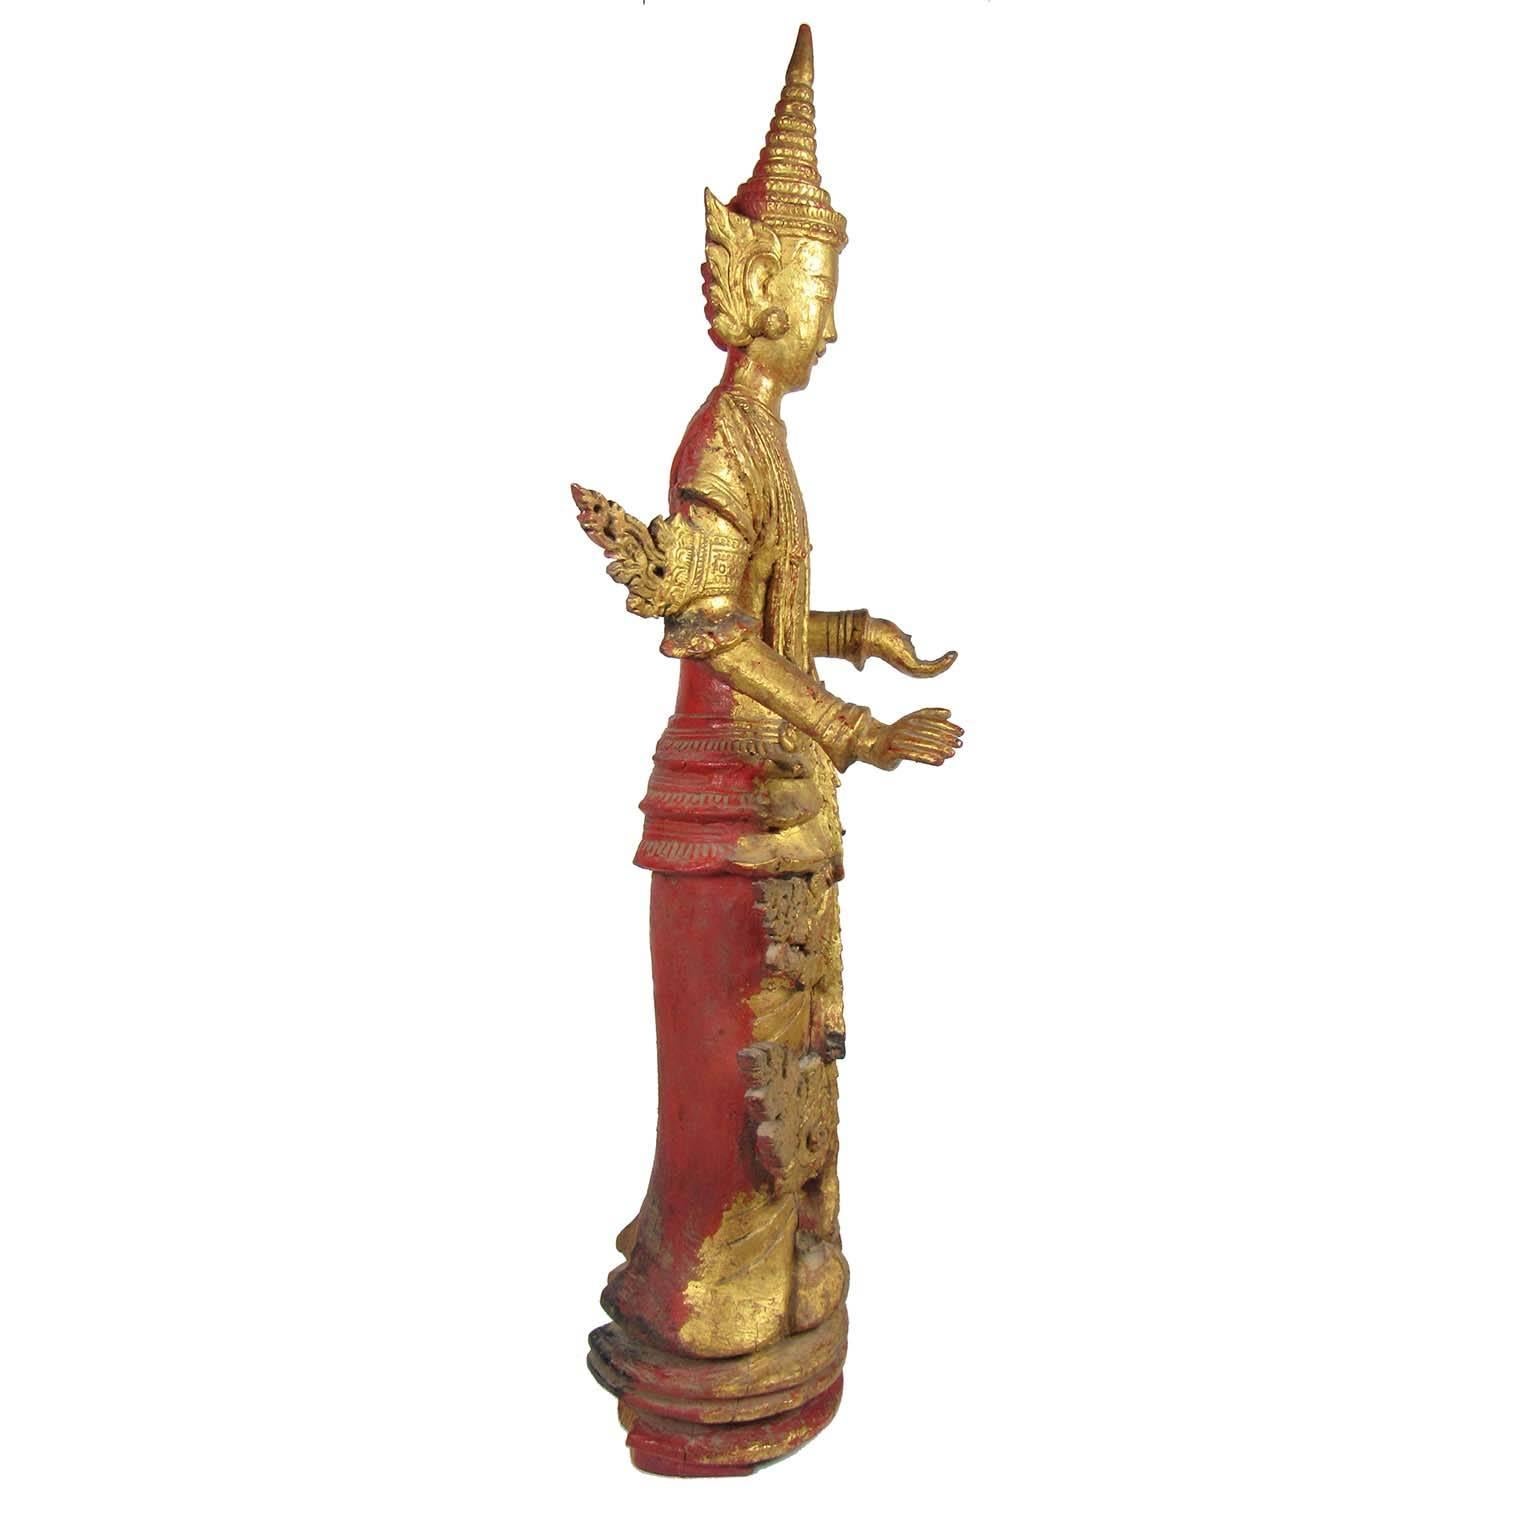 A gilt wooden figure of a standing Buddha, late 19th century, Thailand.
Measures: Height 35 in. (88.9 cm), width 12 in. (30.48 cm), depth 8 1/2 in. (21.59 cm).